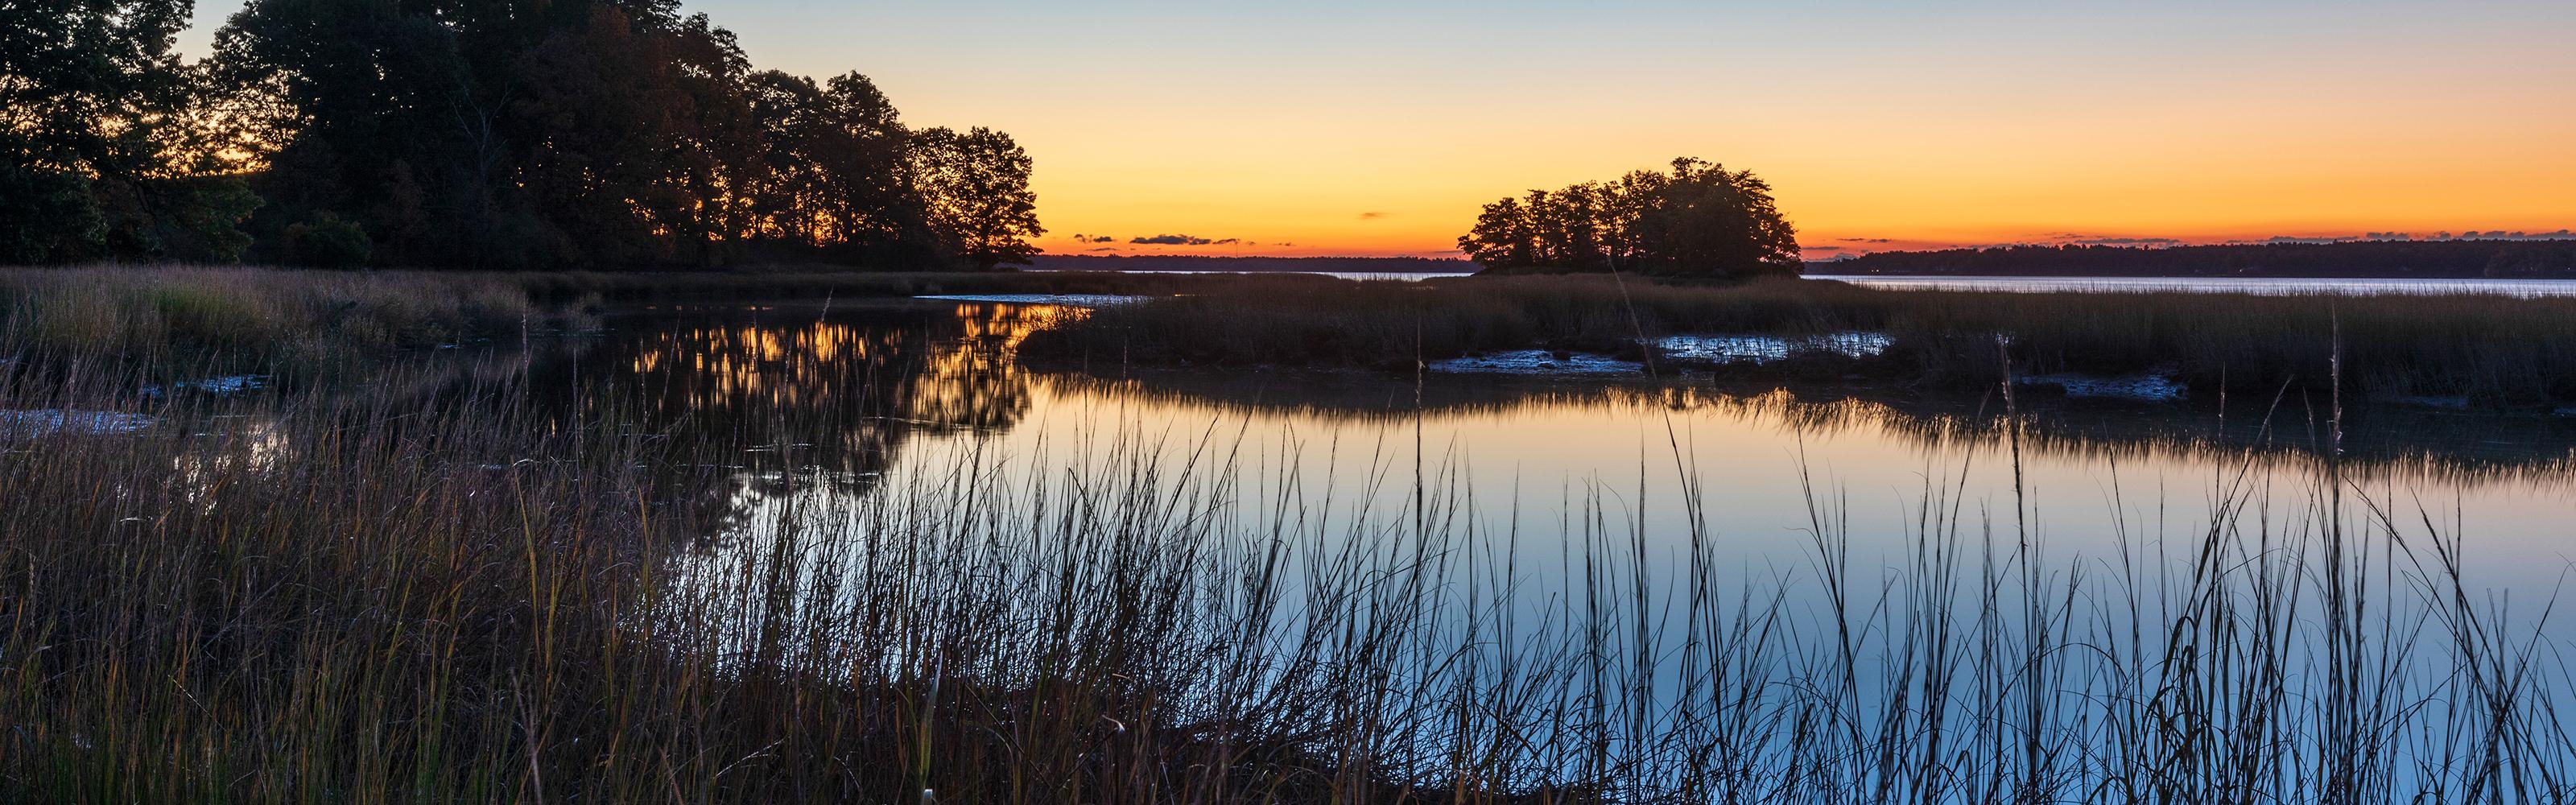 Dawn on the salt marsh at The Nature Conservancy's Lubberland Creek Preserve in Newmarket, New Hampshire. © Jerry and Marcy Monkman/EcoPhoto